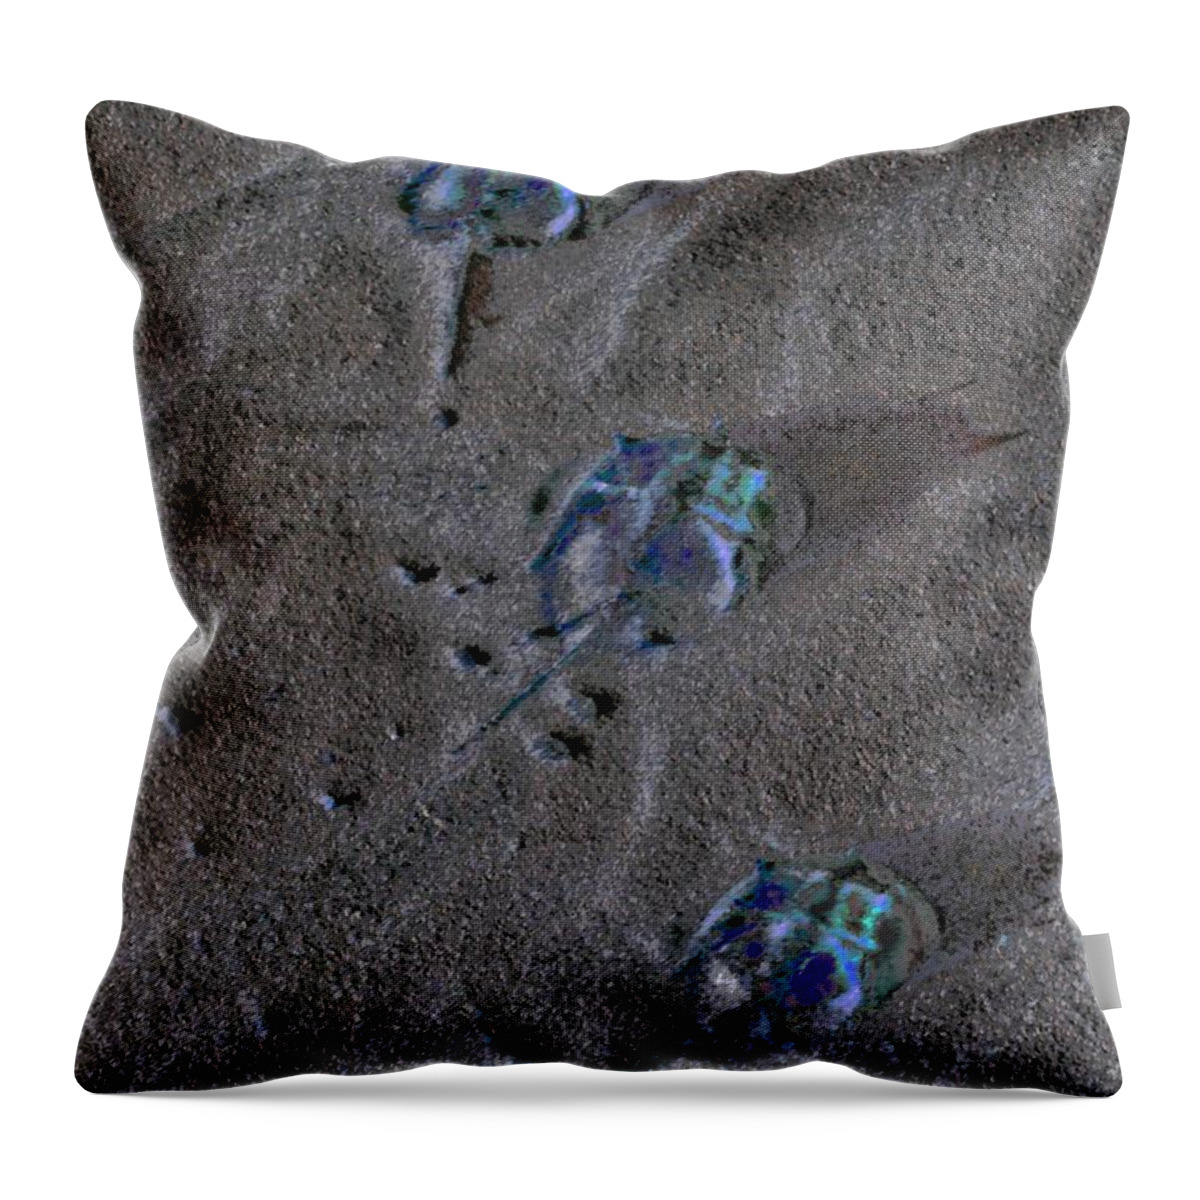 Sand Throw Pillow featuring the digital art Left in a Sea of Tranquility by Vincent Green